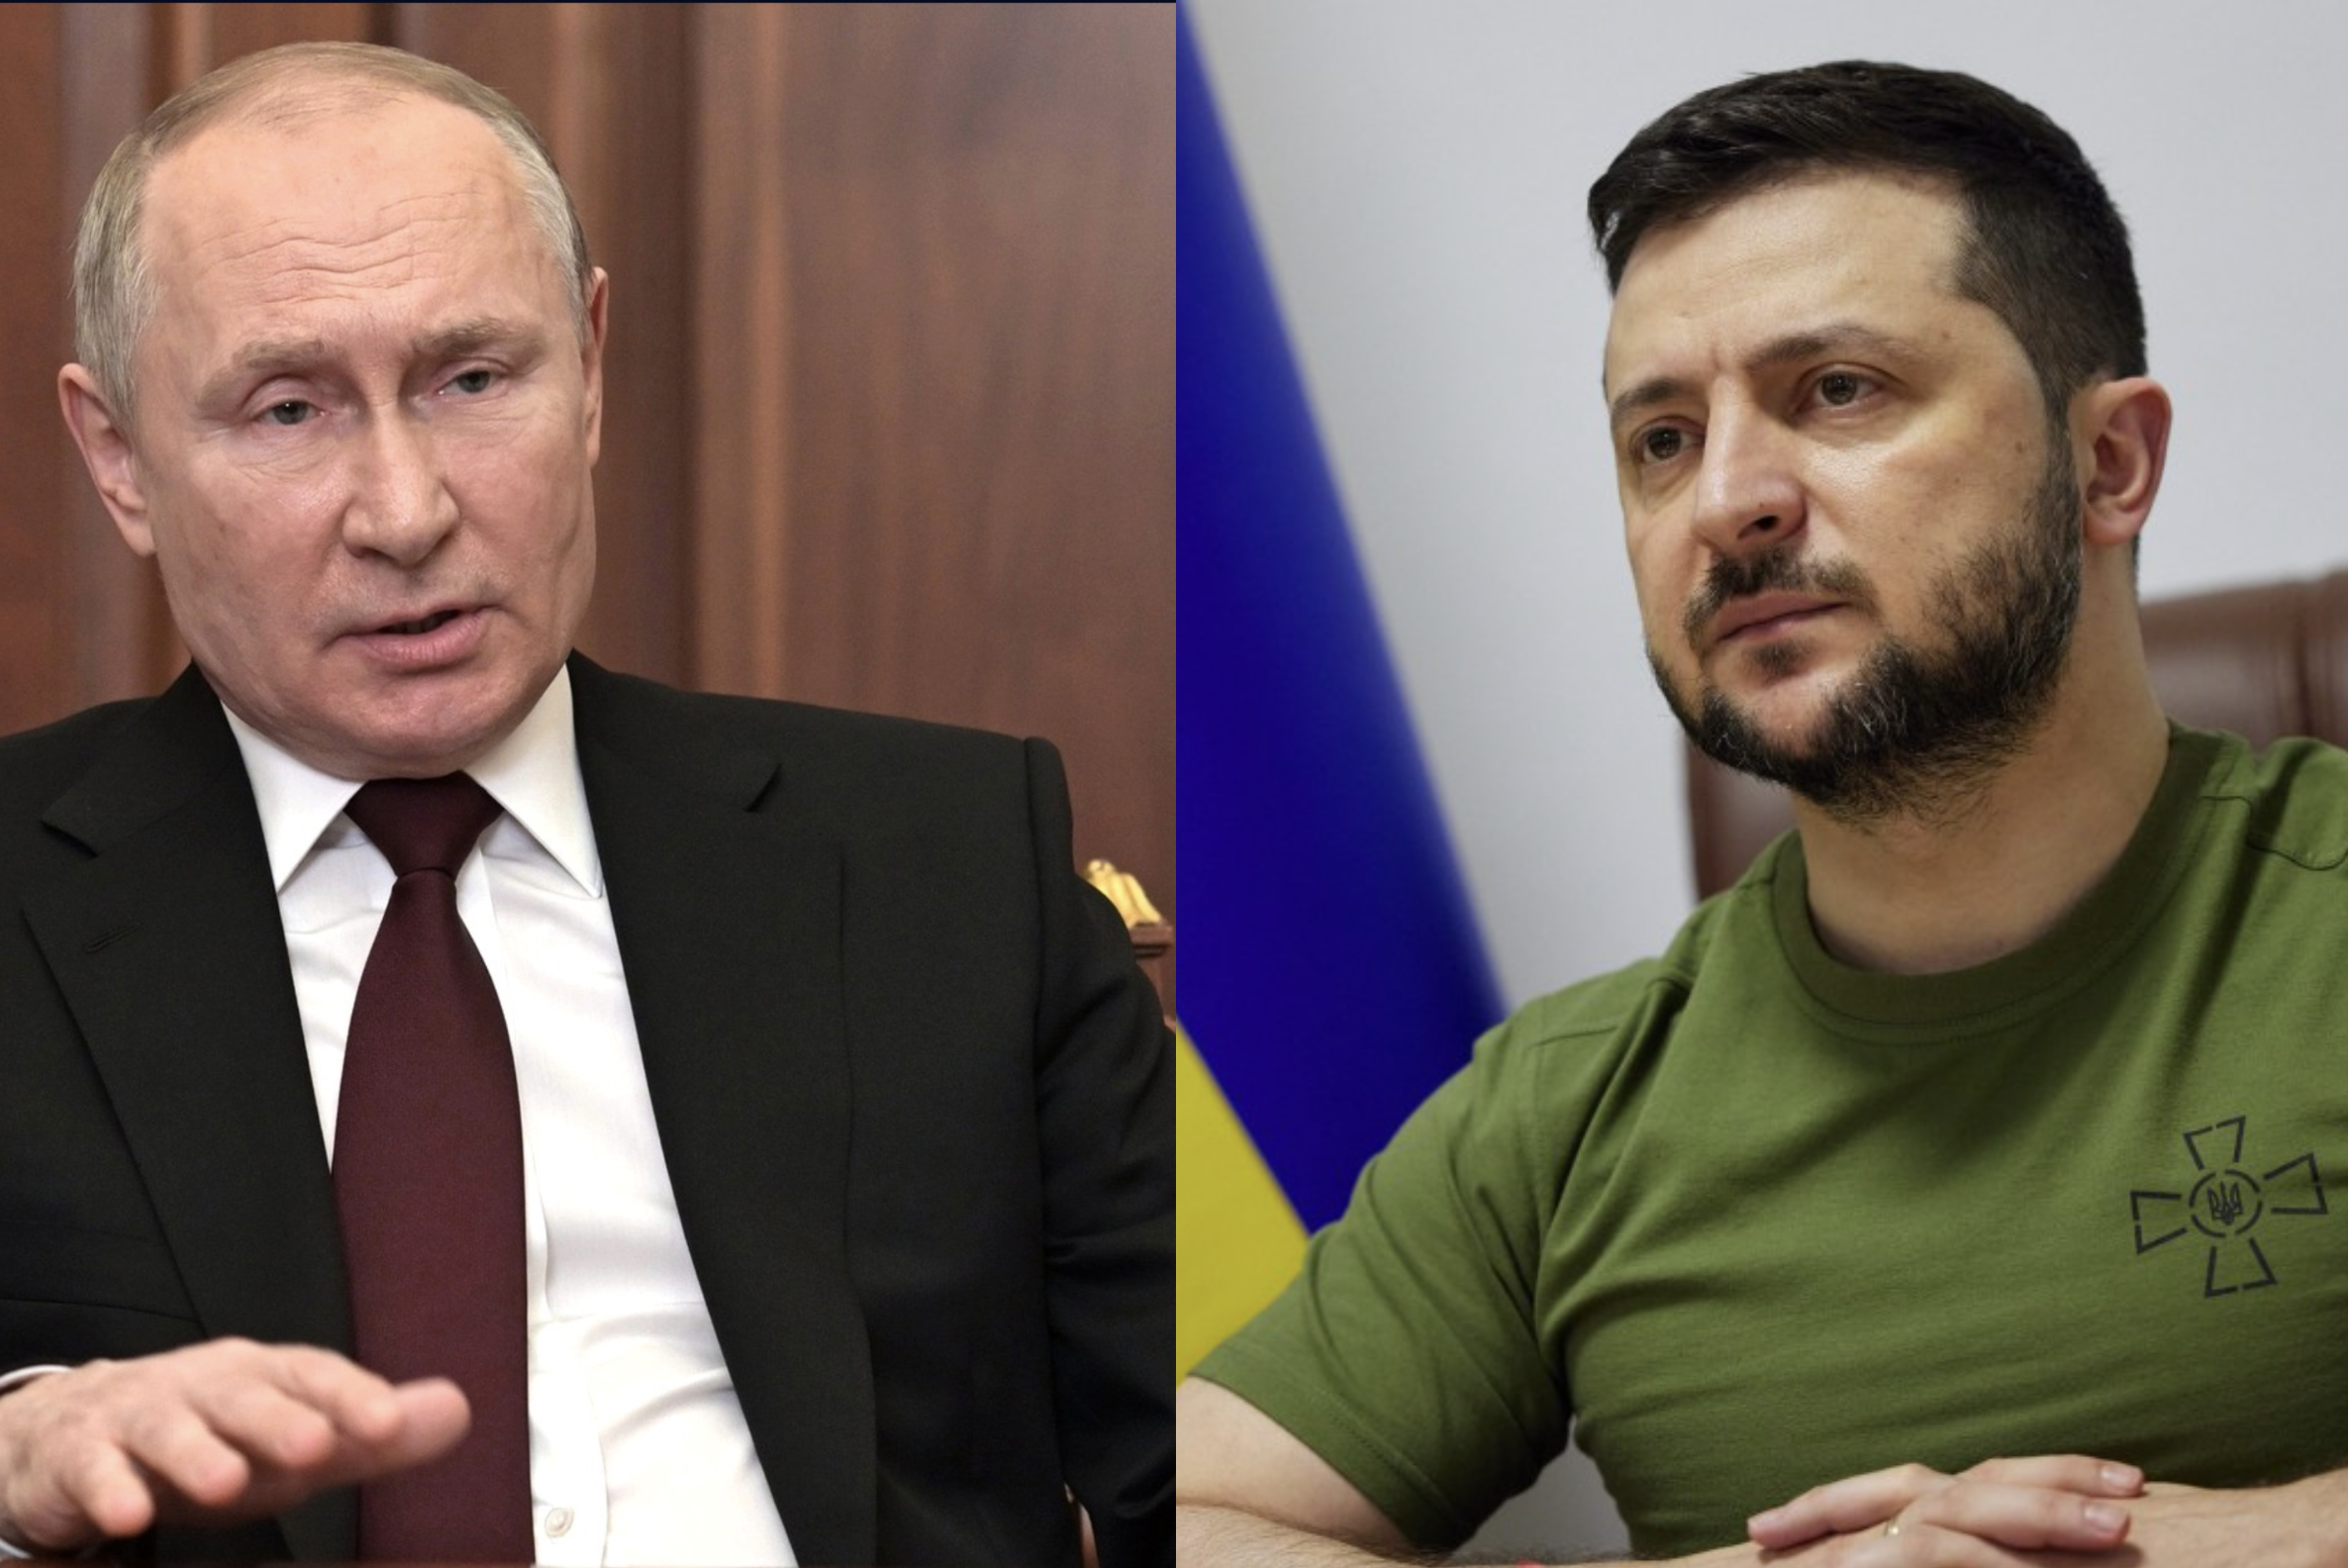 Ukraine President Zelensky open to peace talks with Moscow if rule of law is respected